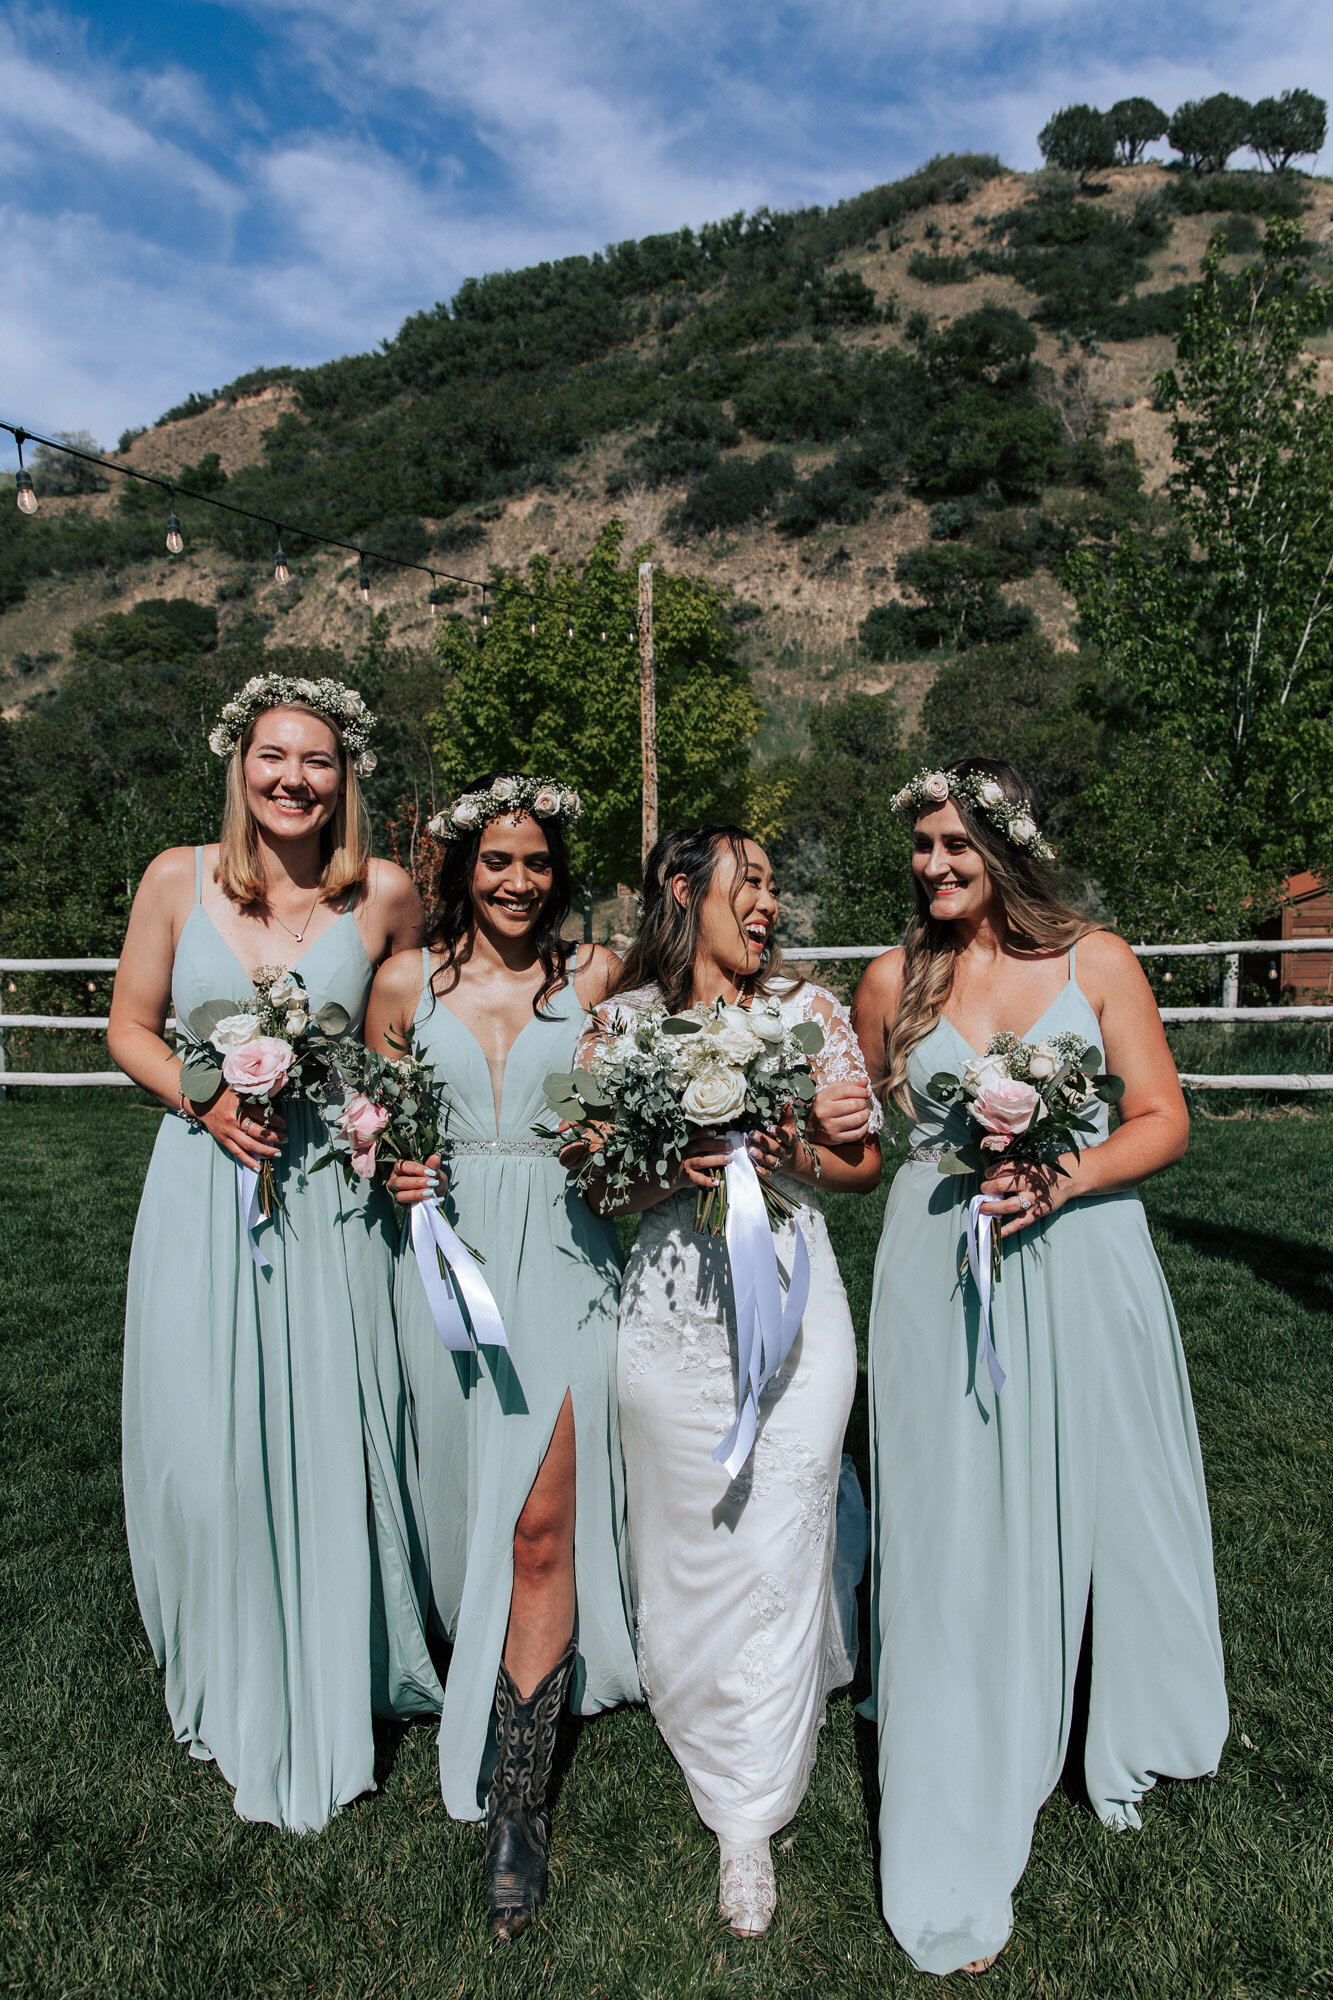  Emily Jenkins Photography laughs as she walks with her three bridesmaids in green dresses at a country wedding at Quiet Meadow Farms. green bridesmaid dresses floral crowns for bridesmaids #emilyjenkinsphotography #emilyjenkinsweddings #utahweddings